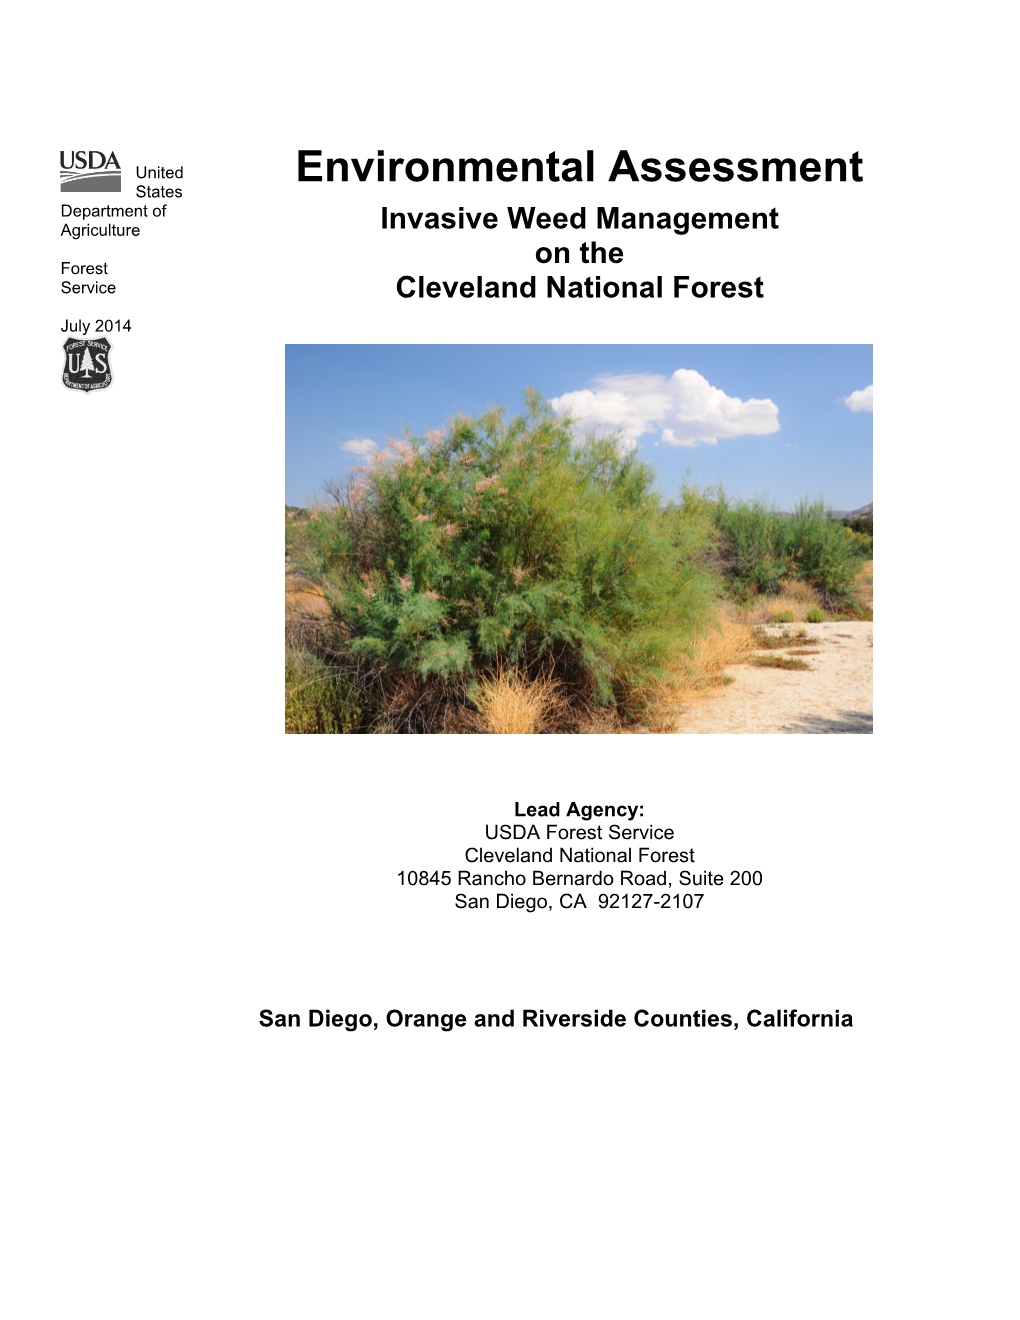 Environmental Assessment Invasive Weed Management on the Cleveland National Forest